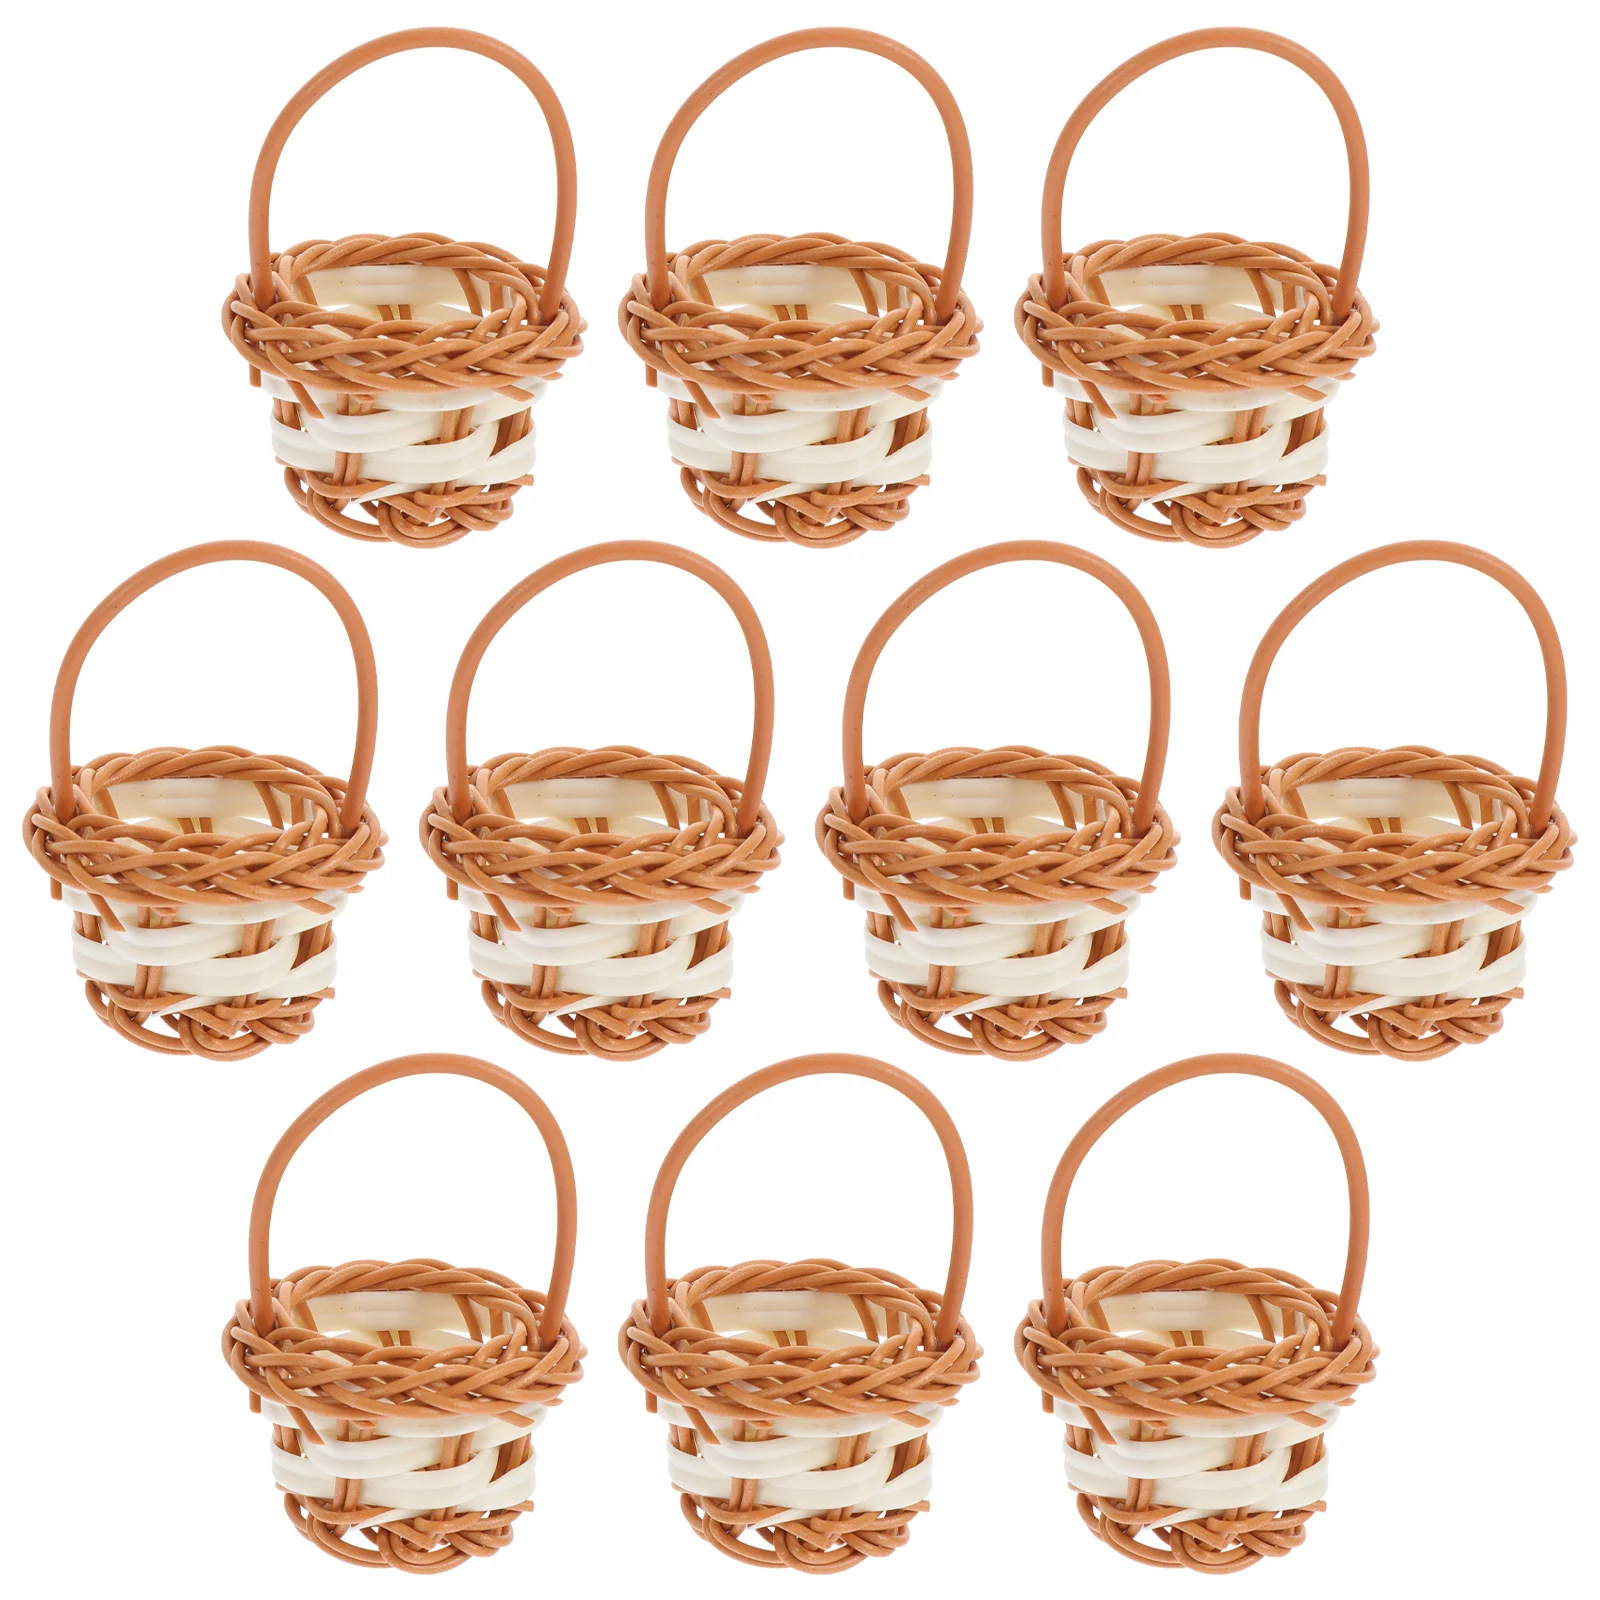 10 Pcs Portable Flower Basket Decor Rattan Decorative Baby Food Containers Mini Handwoven Rural Style Kids Hand-made